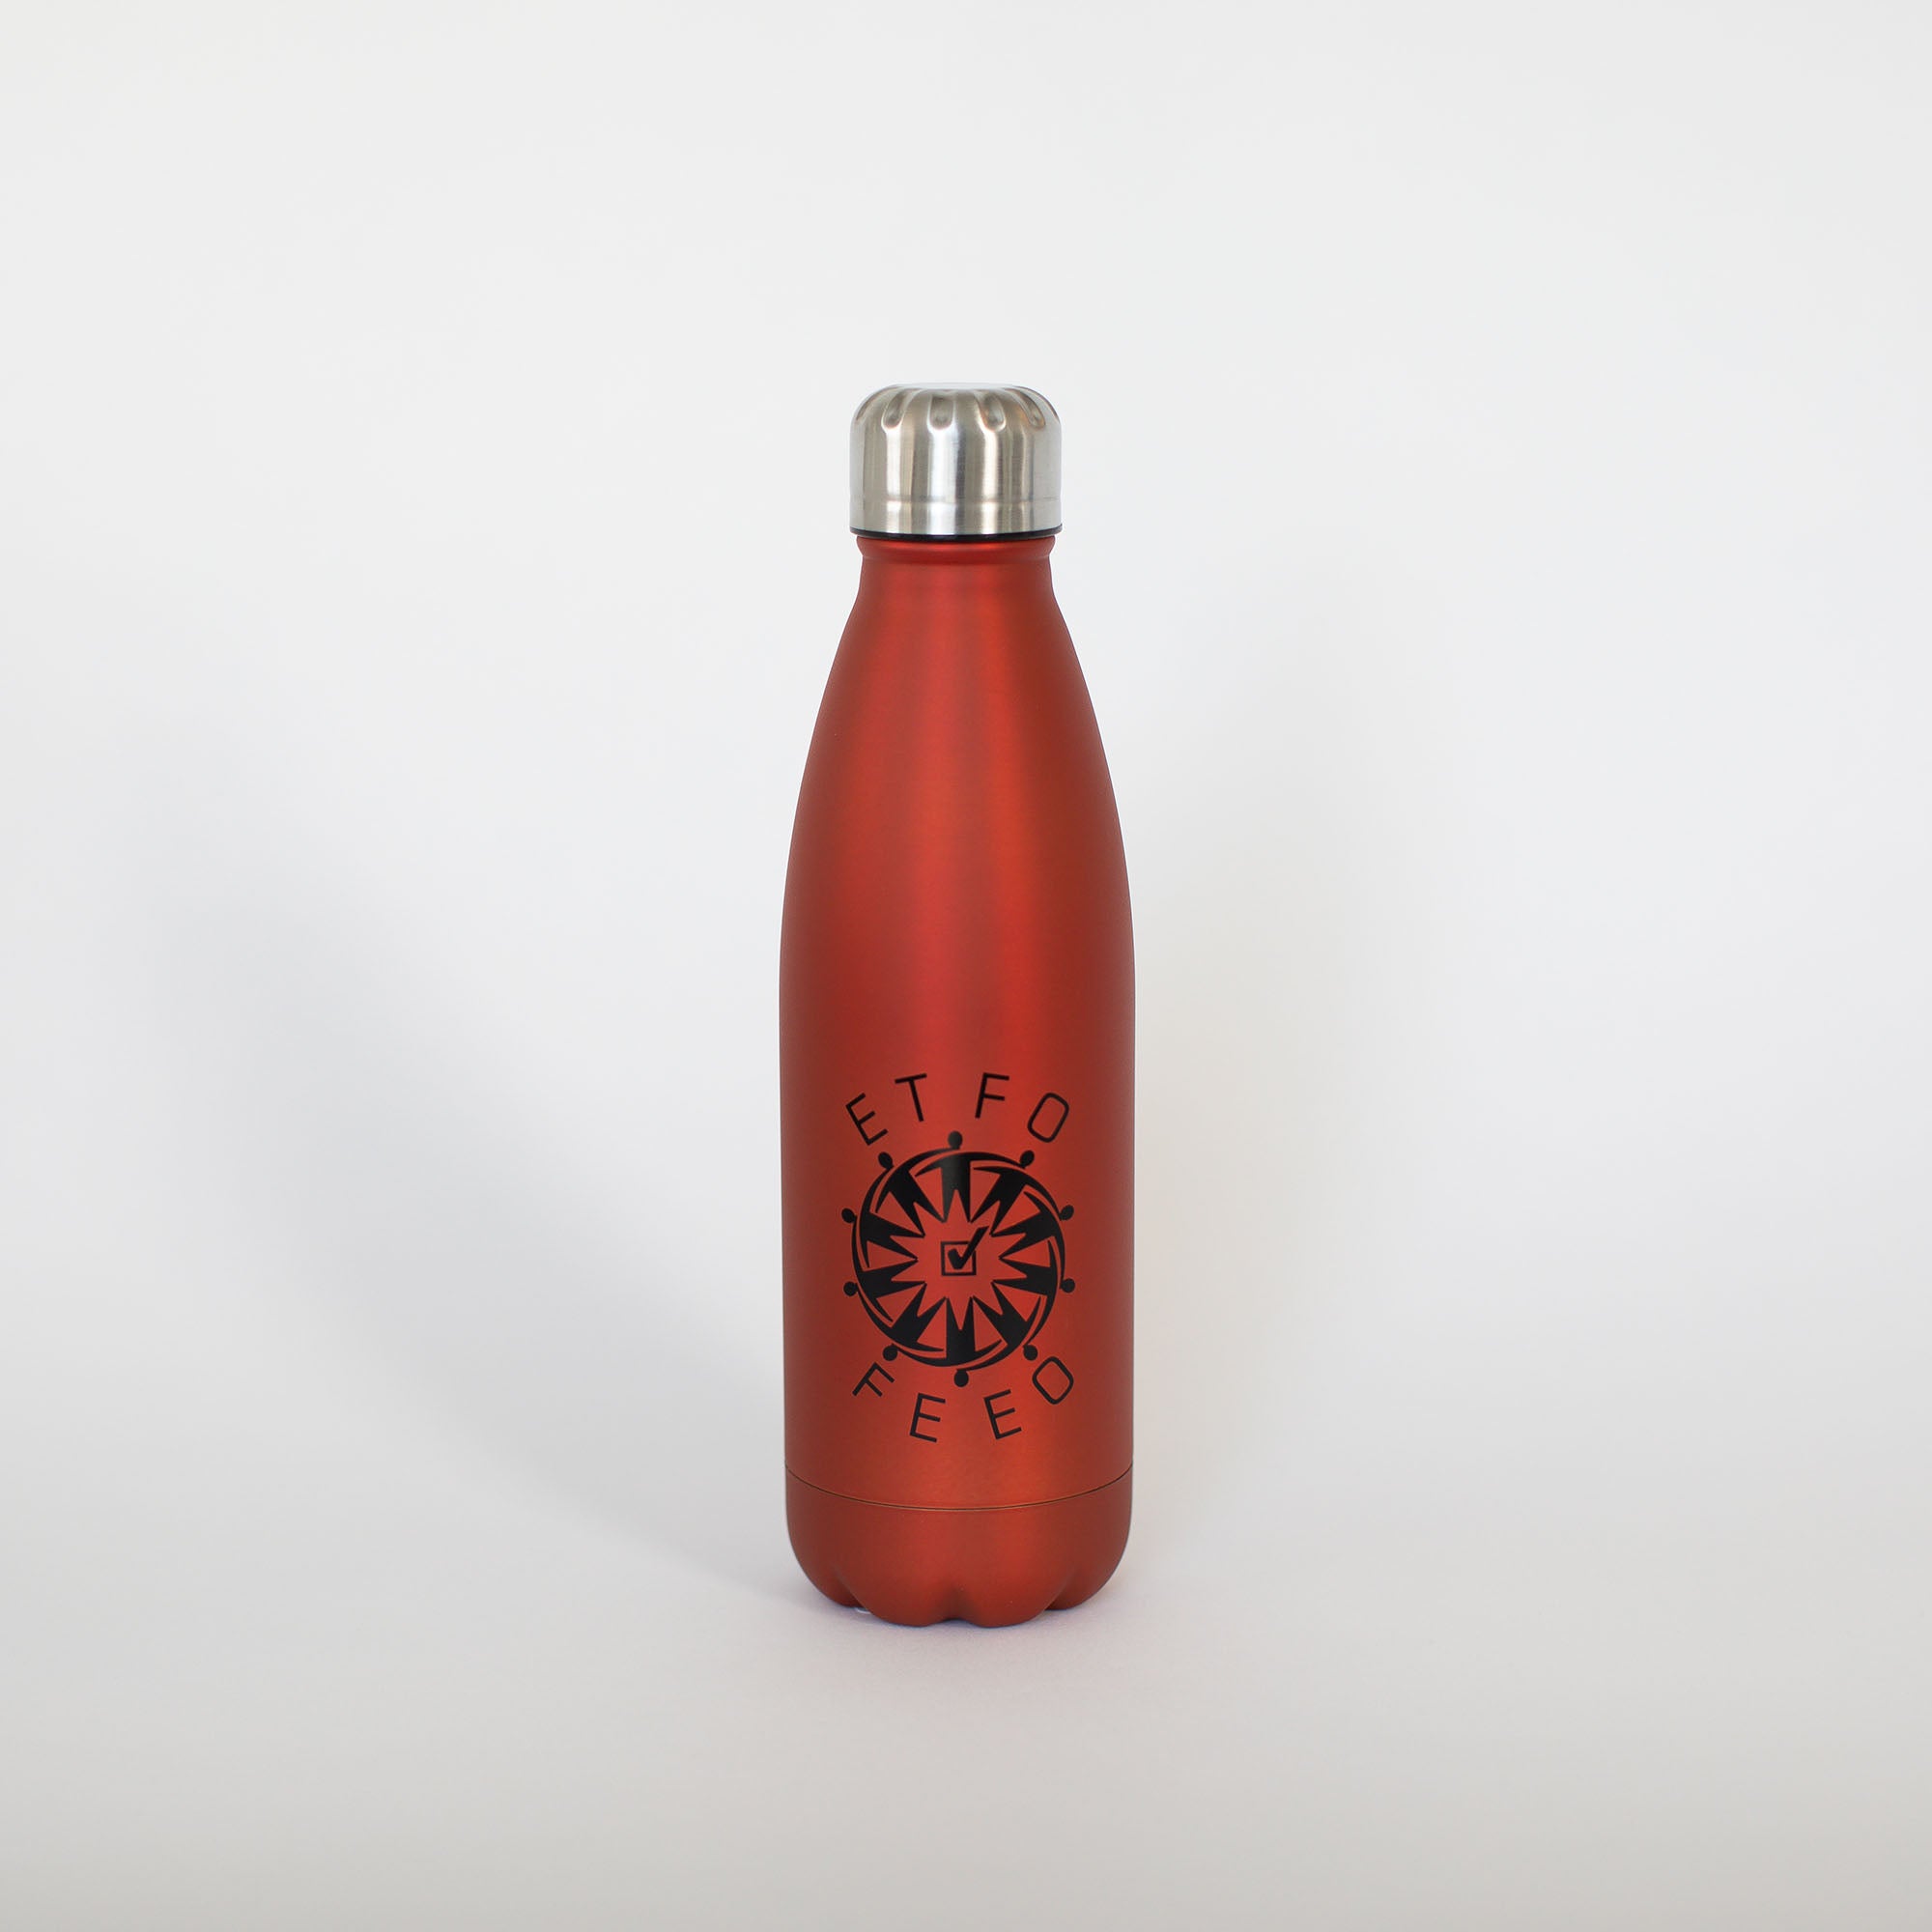 Propane Tank-ard Insulated Beverage Bottle : 14 Steps (with